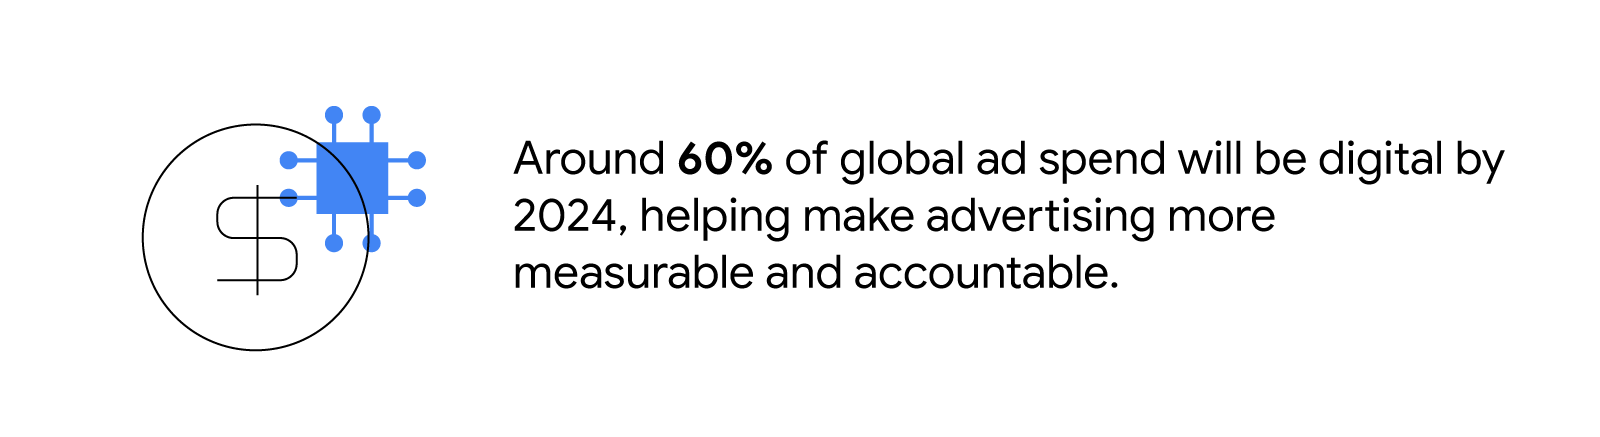 An illustration of a dollar coin is overlaid by one of a stylized microchip and paired with the stat: Around 60% of global ad spend will be digital by 2024, helping make advertising more measurable and accountable.